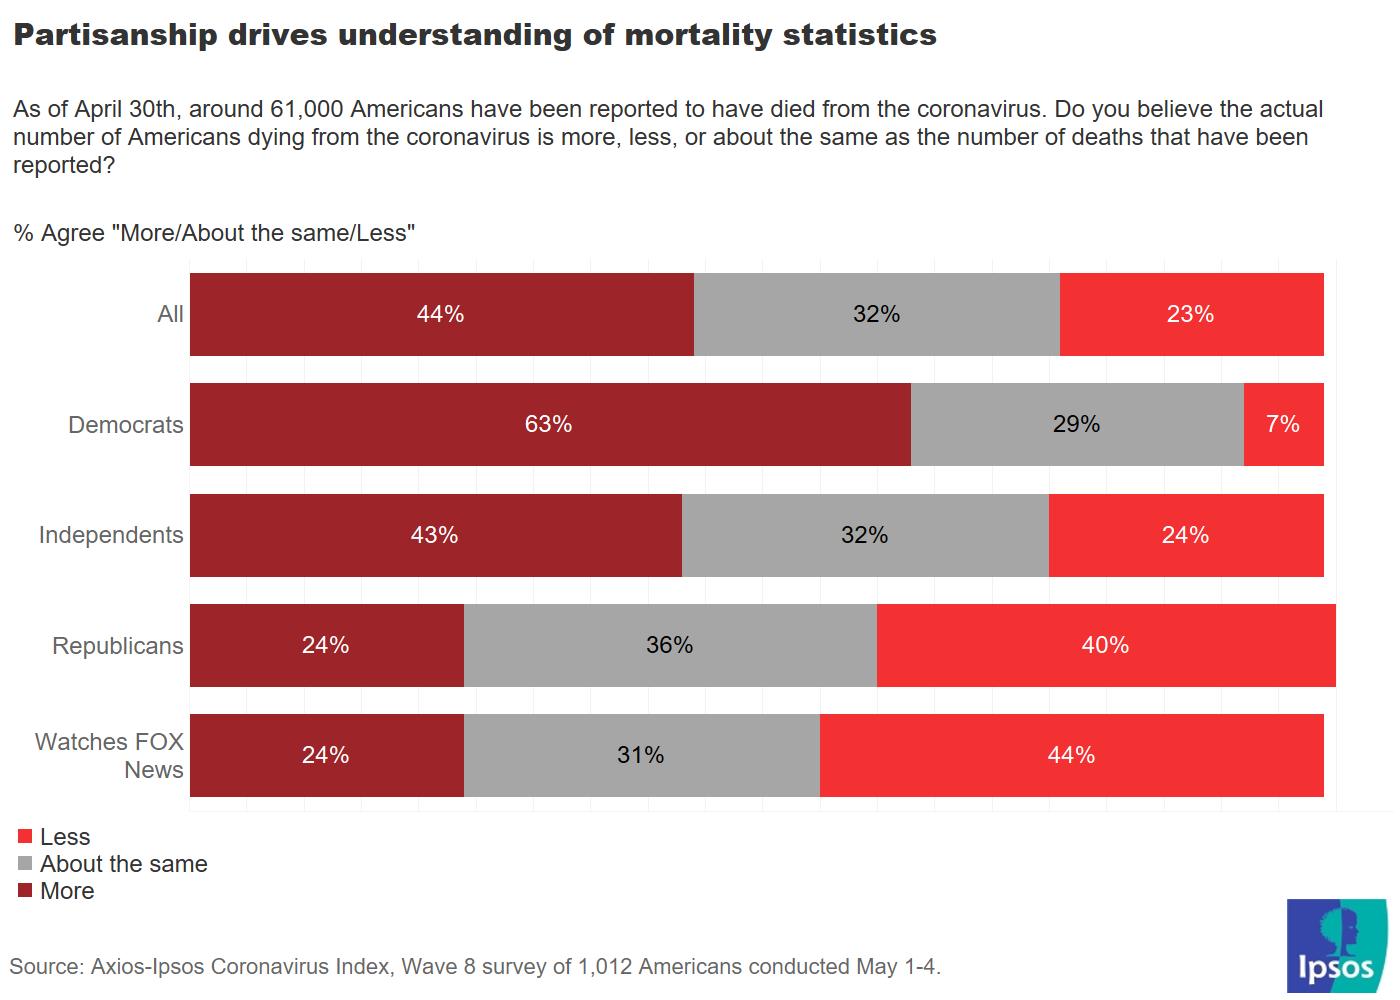 Partisan understanding of mortality rate